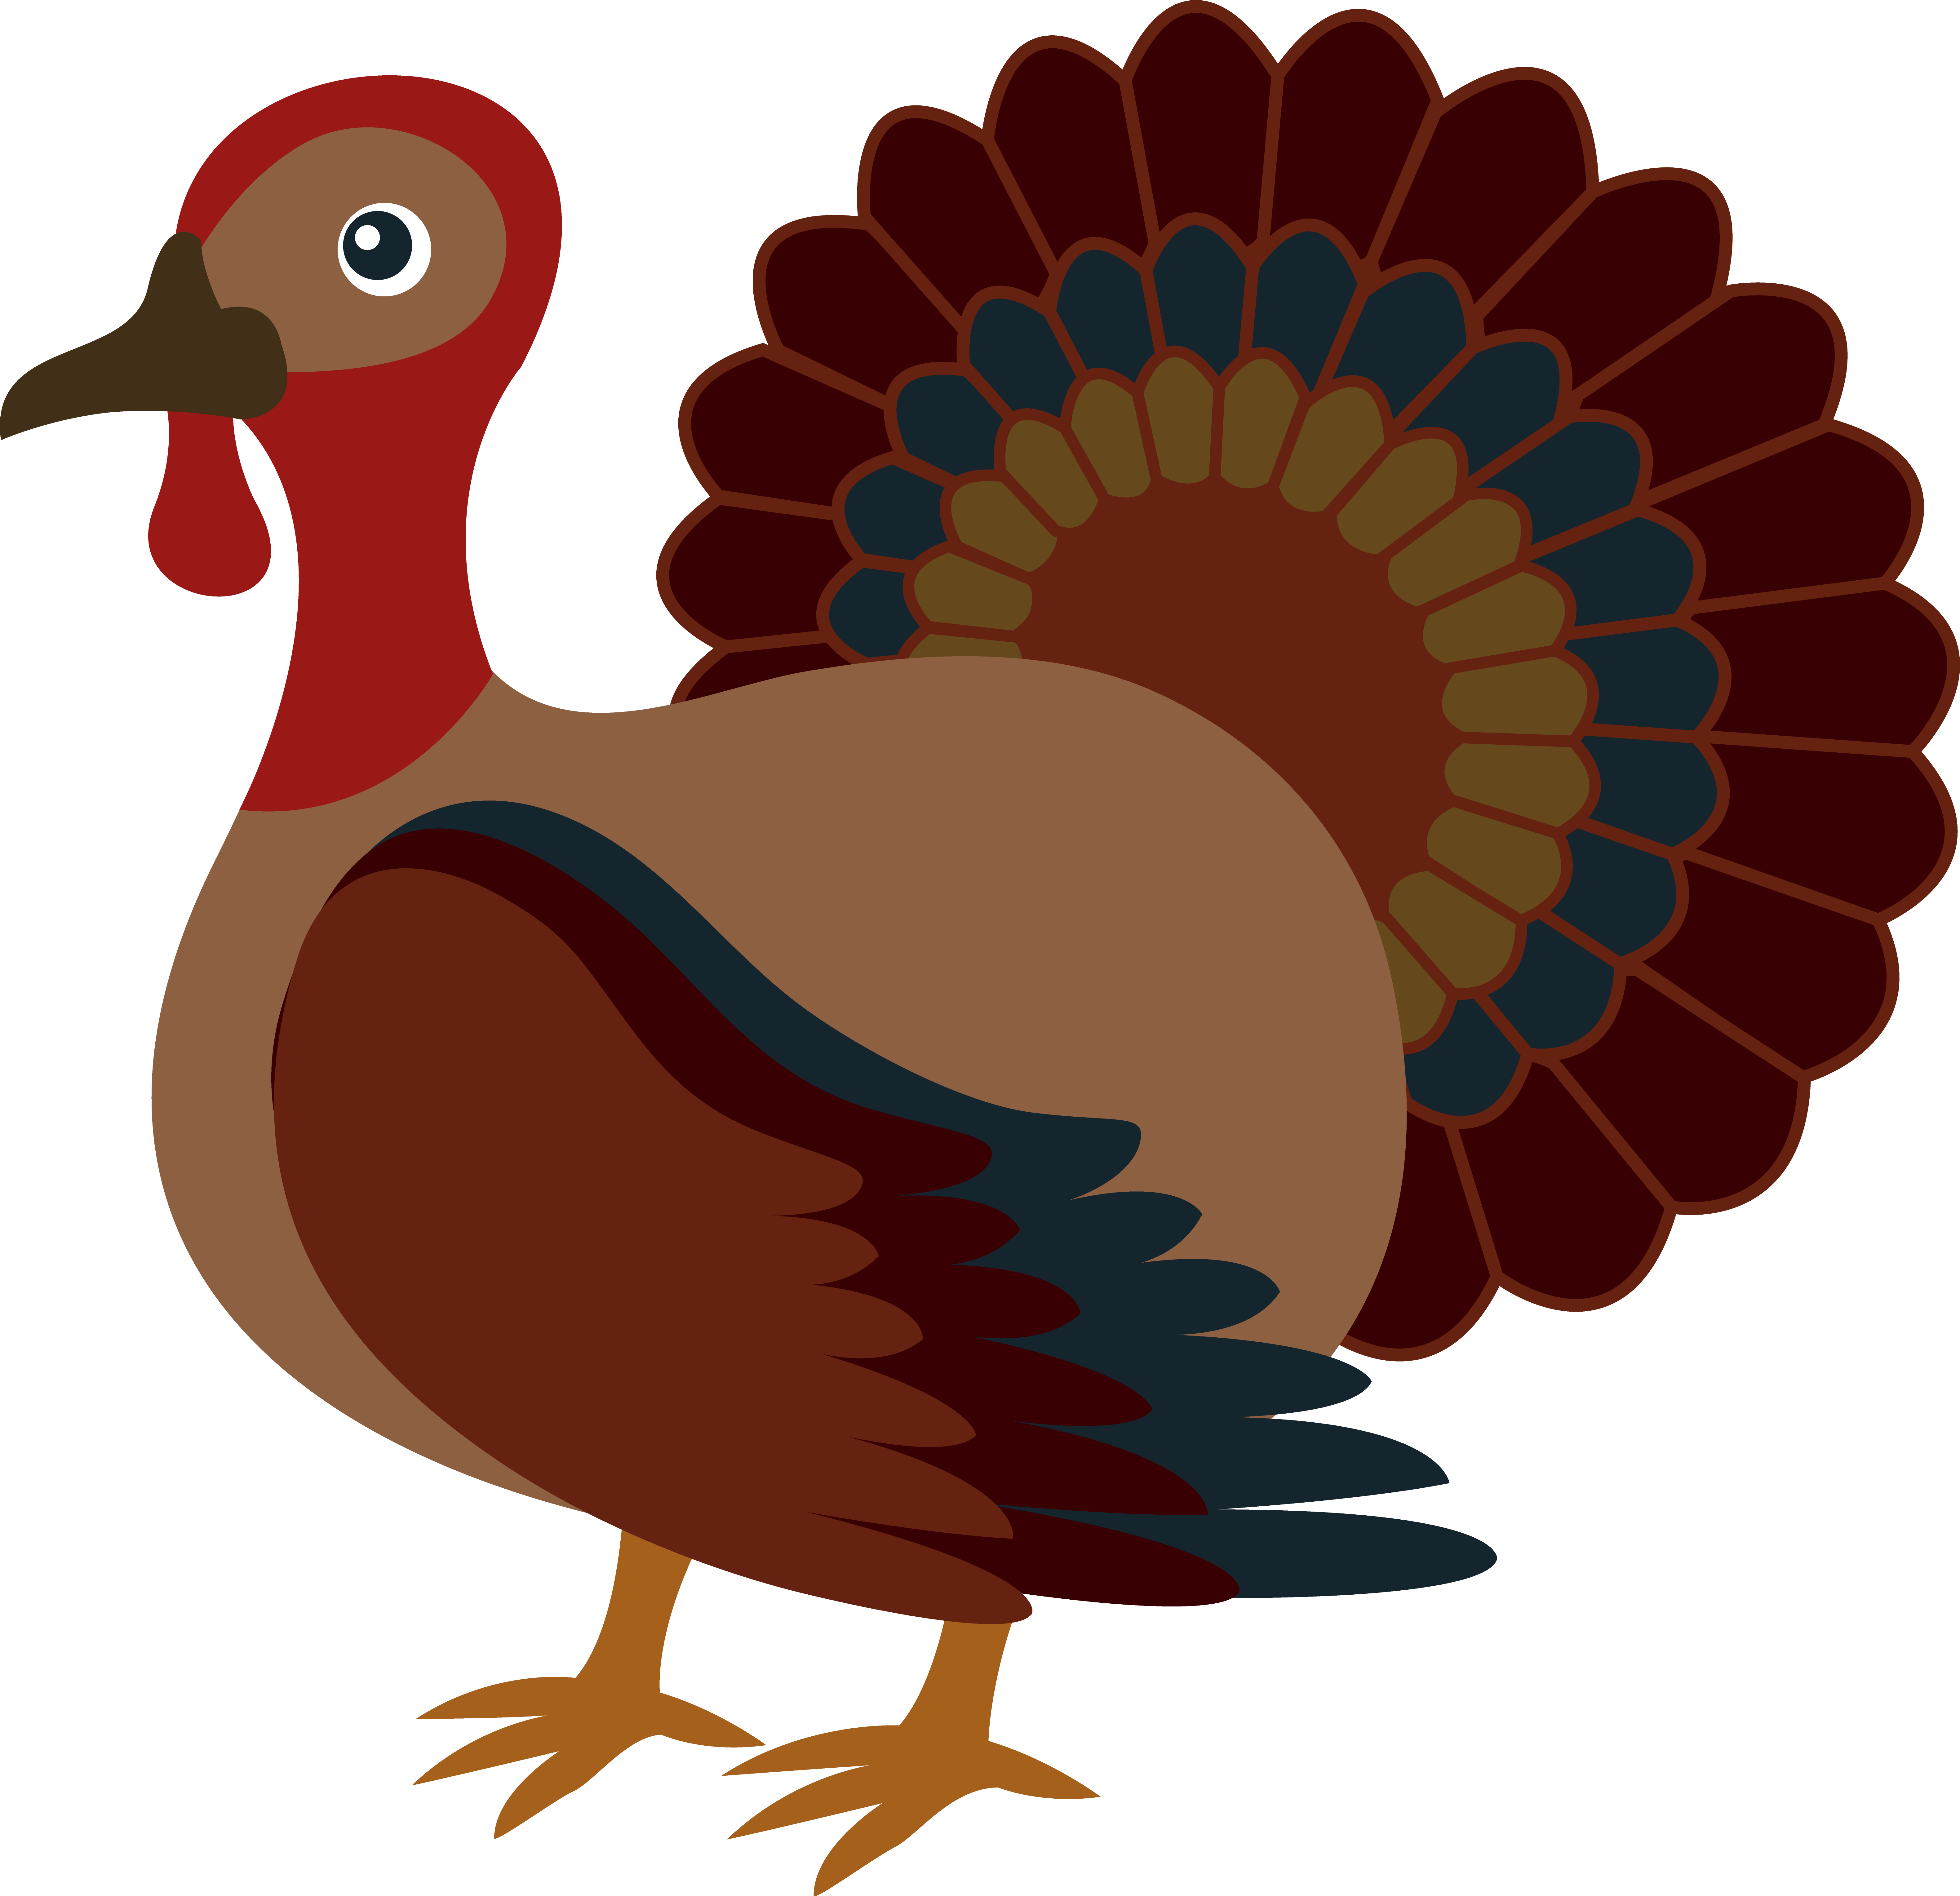 free clip art images thanksgiving - photo #37